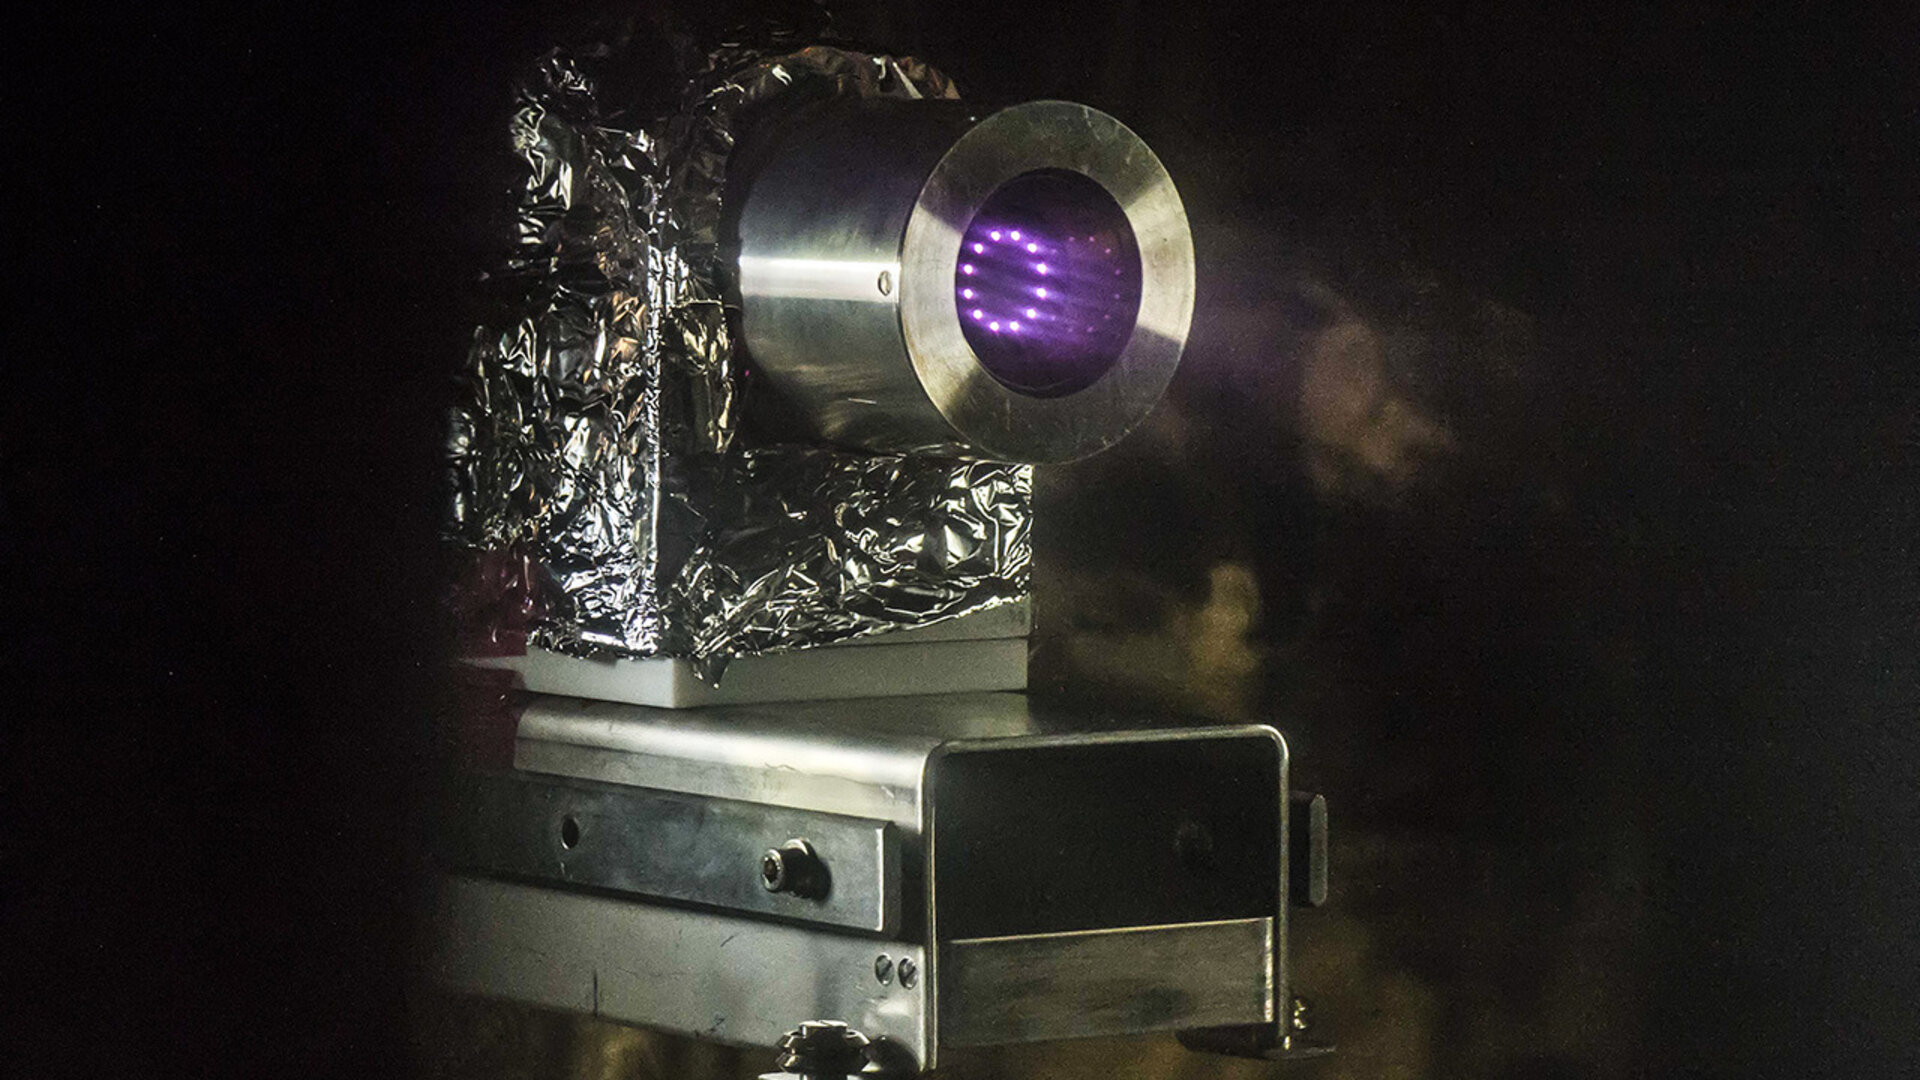 MiniRIT thruster being tested